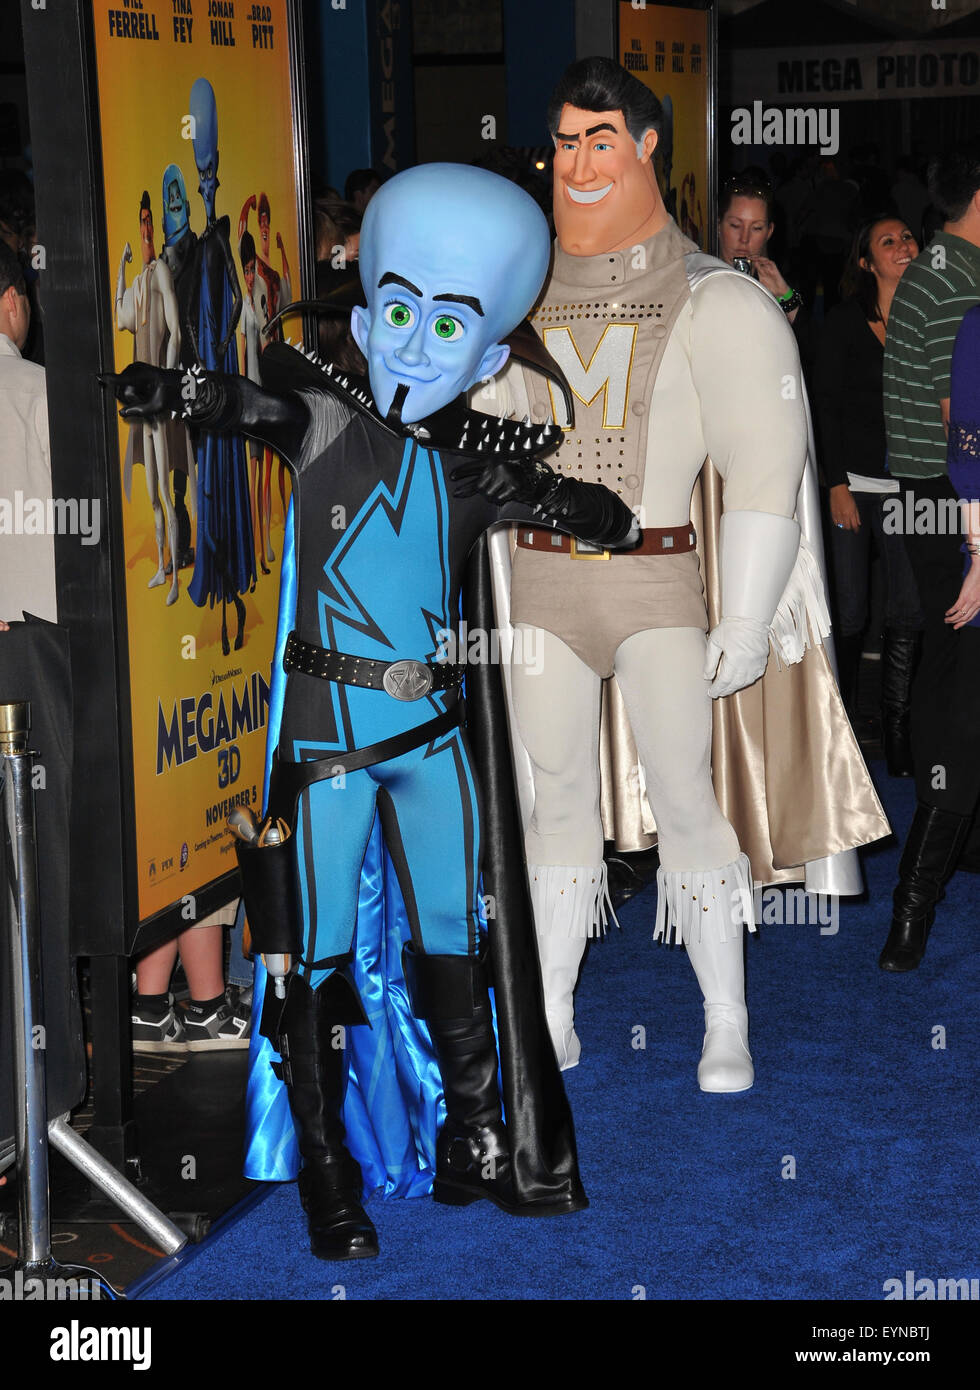 LOS ANGELES, CA - OCTOBER 30, 2010: characters at the Los Angeles premiere of 'MegaMind' at Mann's Chinese Theatre, Hollywood. Stock Photo